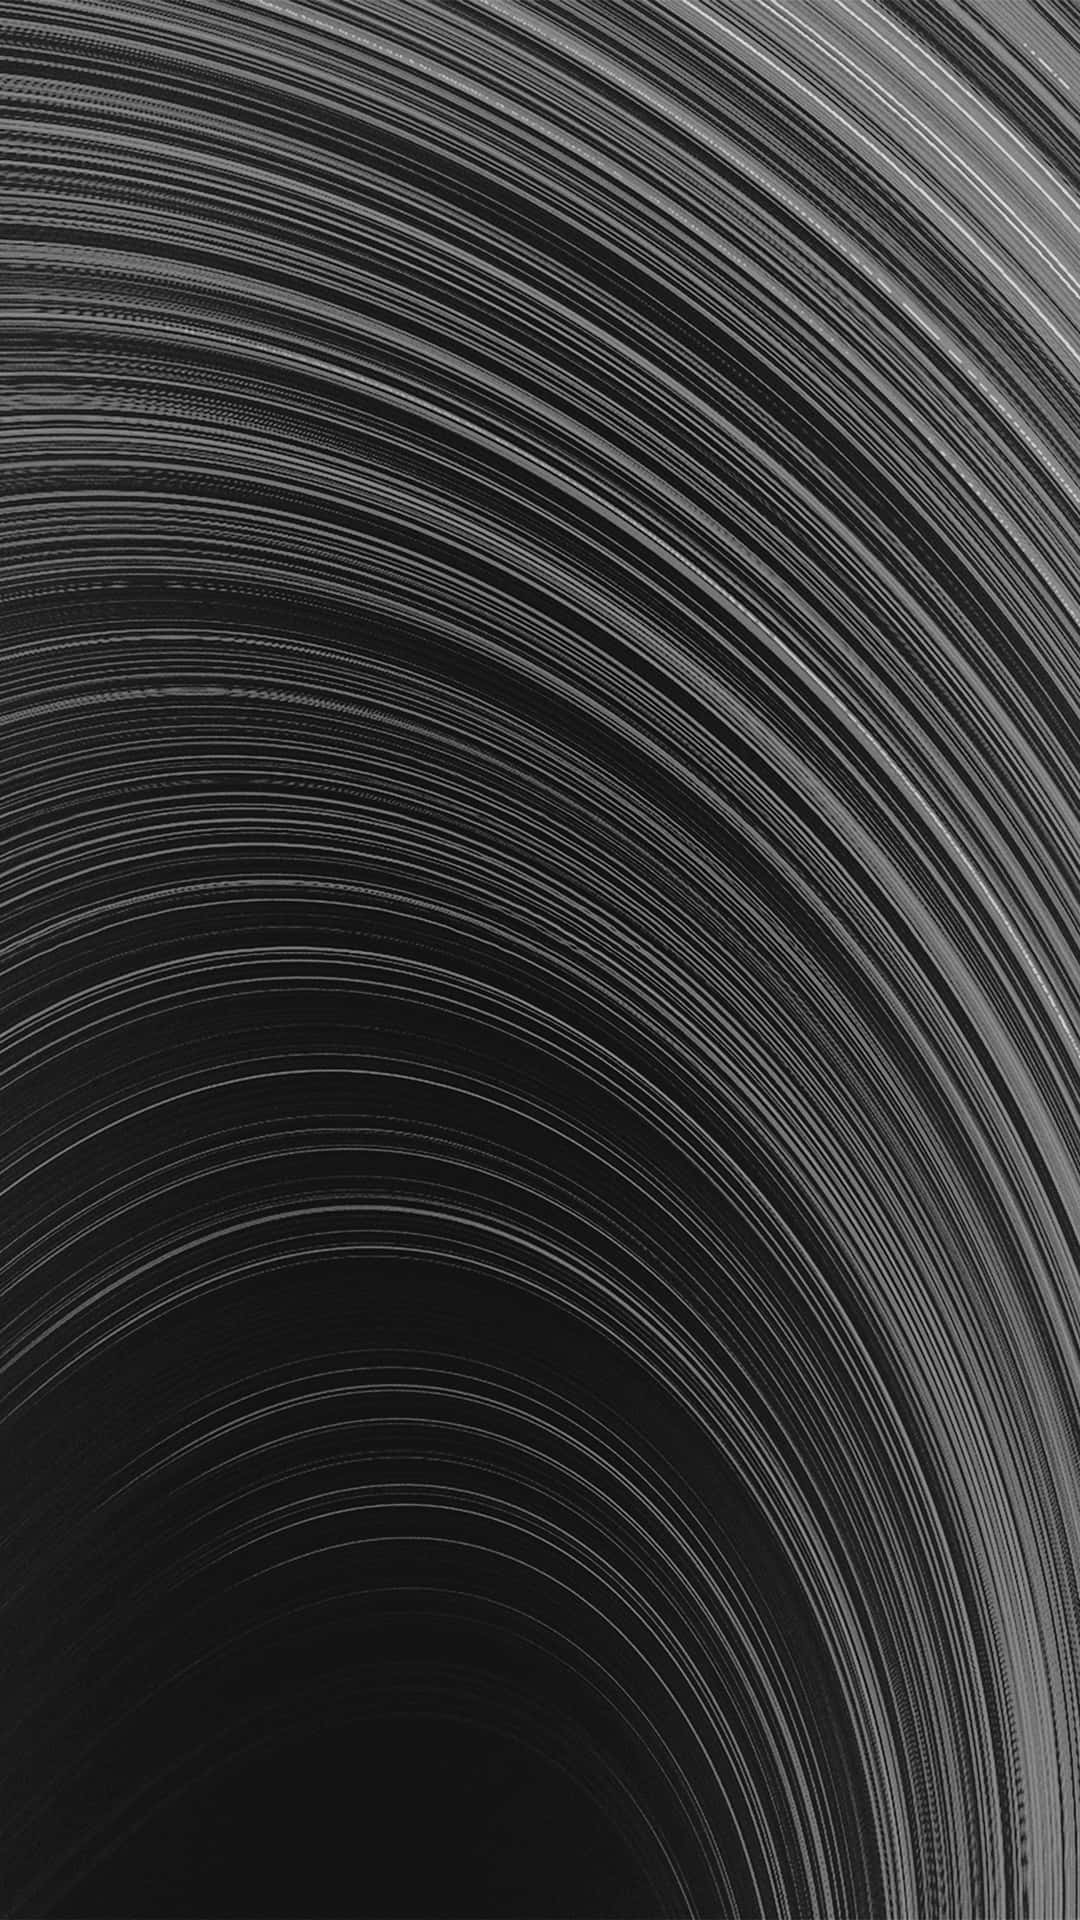 Saturn's Rings In Black And White